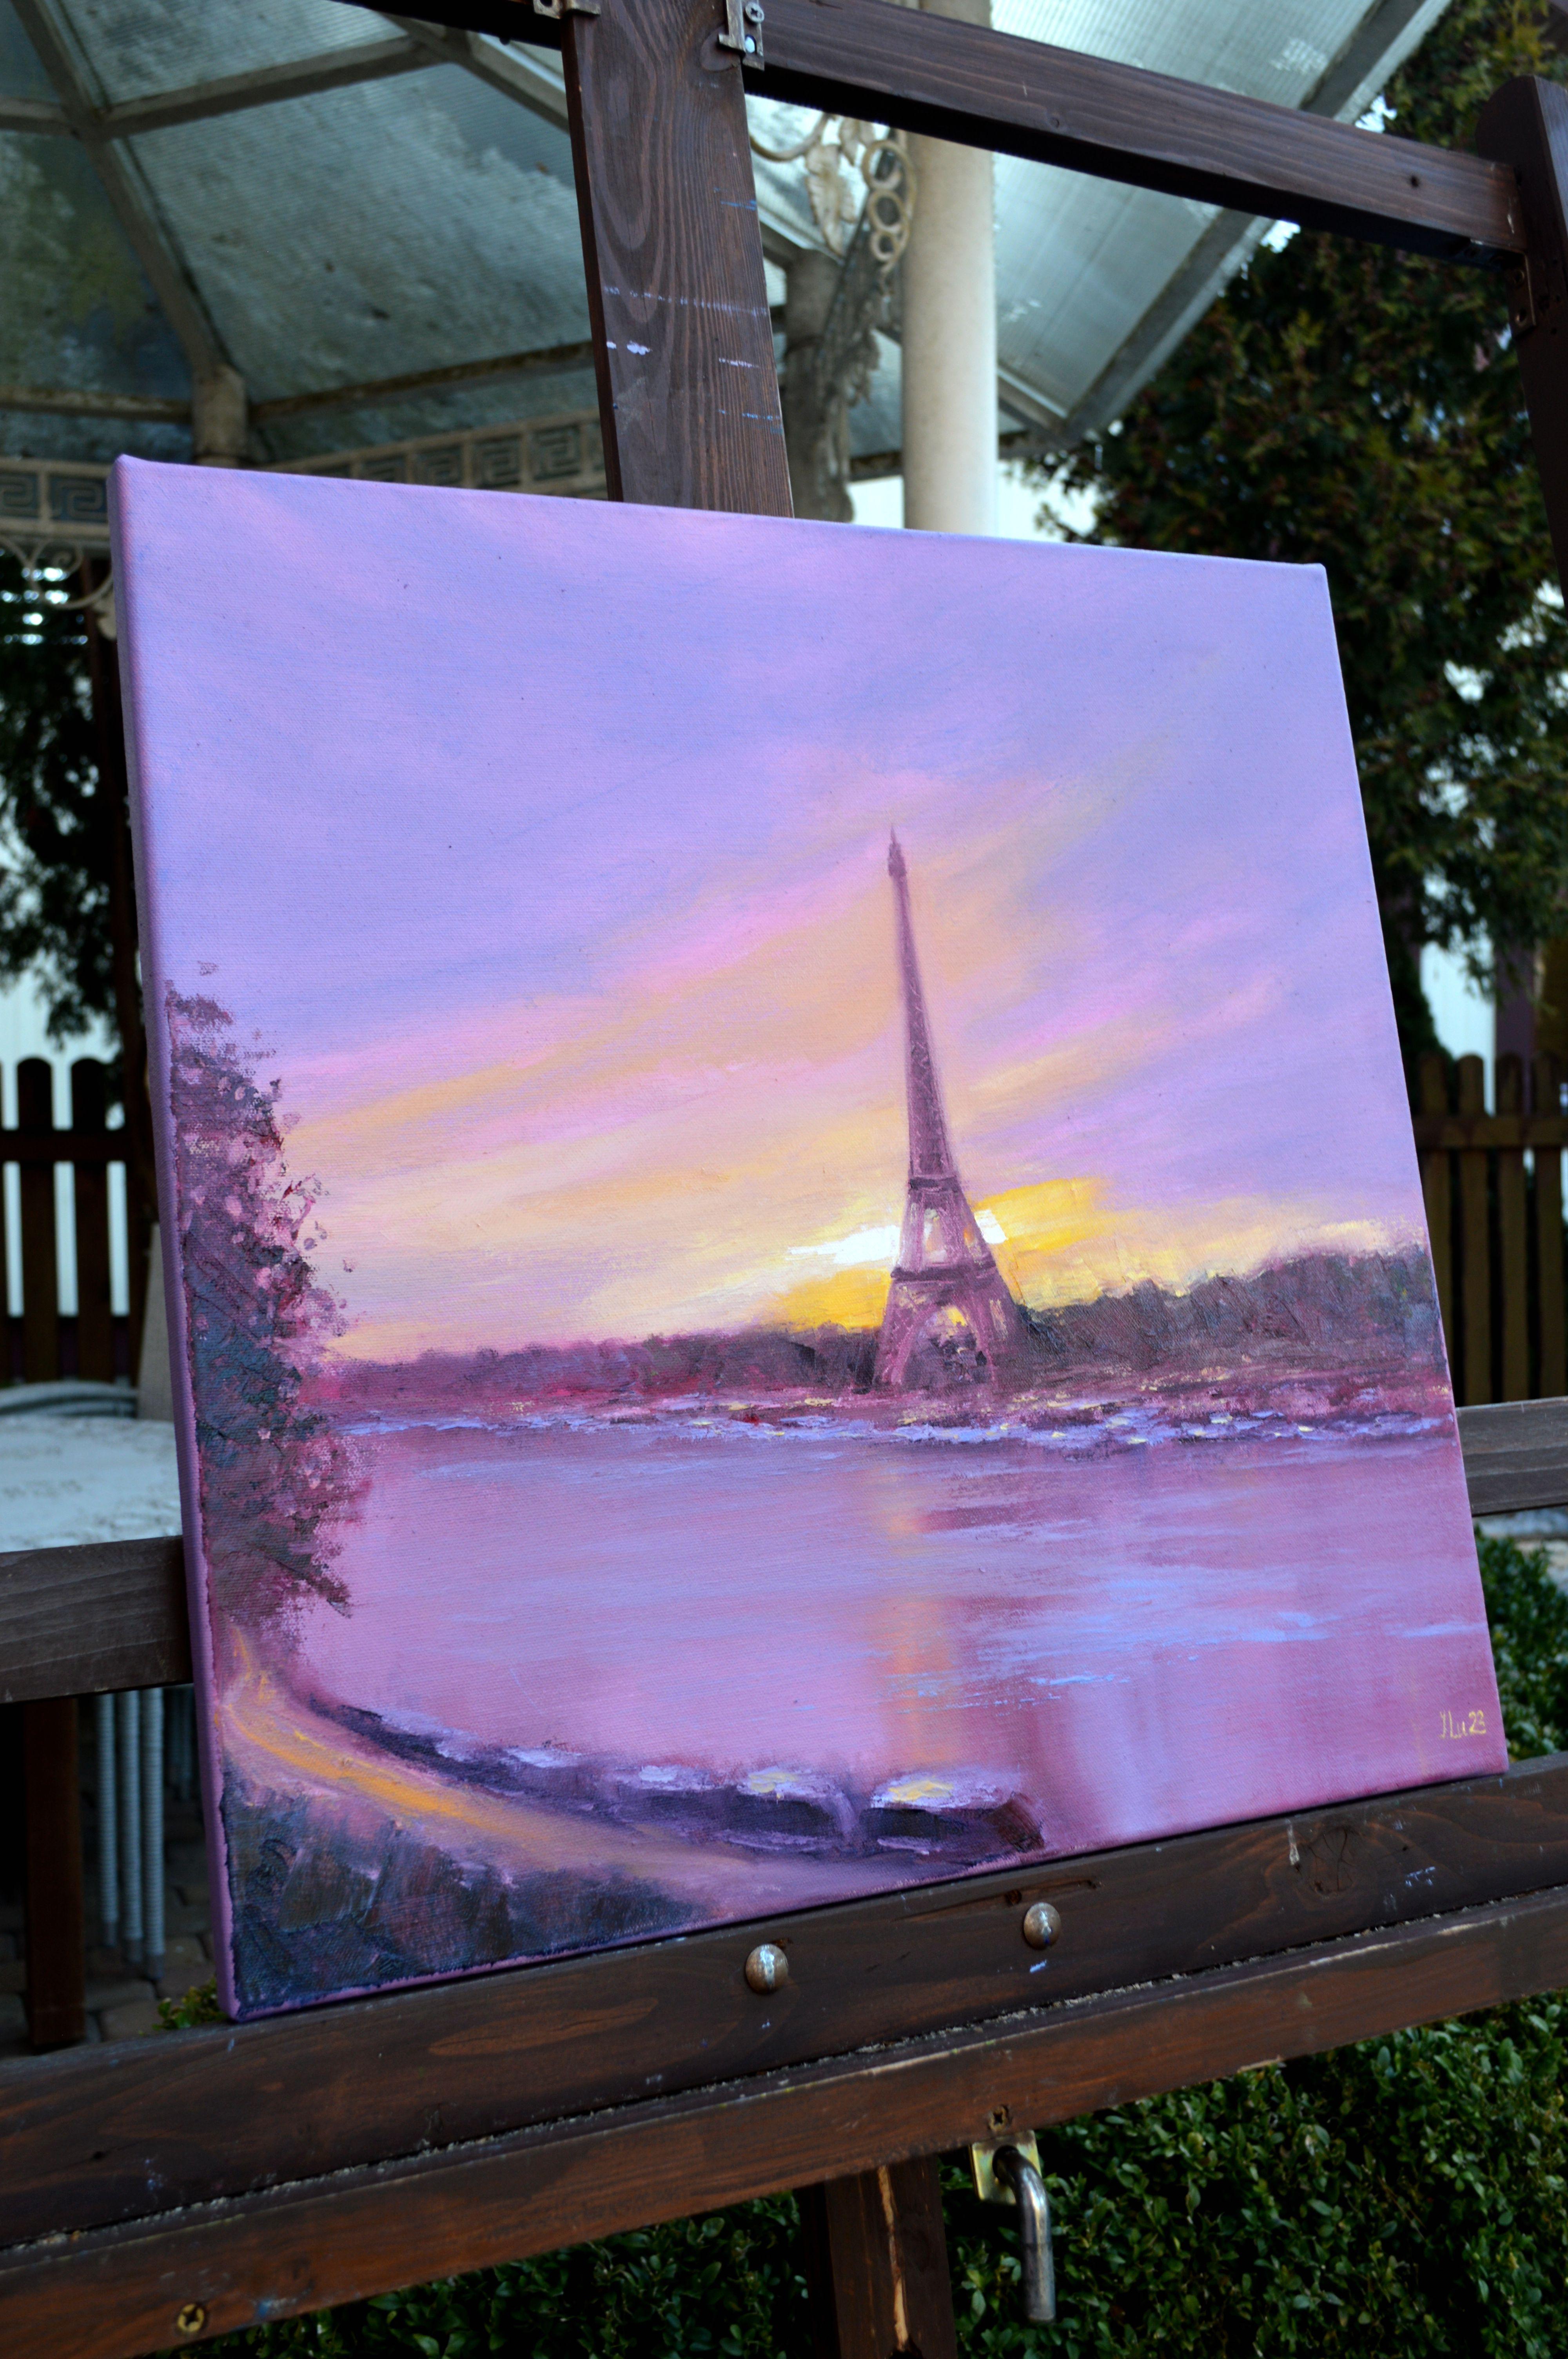 In this vibrant oil painting, I've captured the romance of twilight caressing Paris. My brushstrokes convey the dynamic energy of day giving way to night, as the sky blushes with warm hues. The iconic silhouette of the Eiffel Tower stands sentinel,